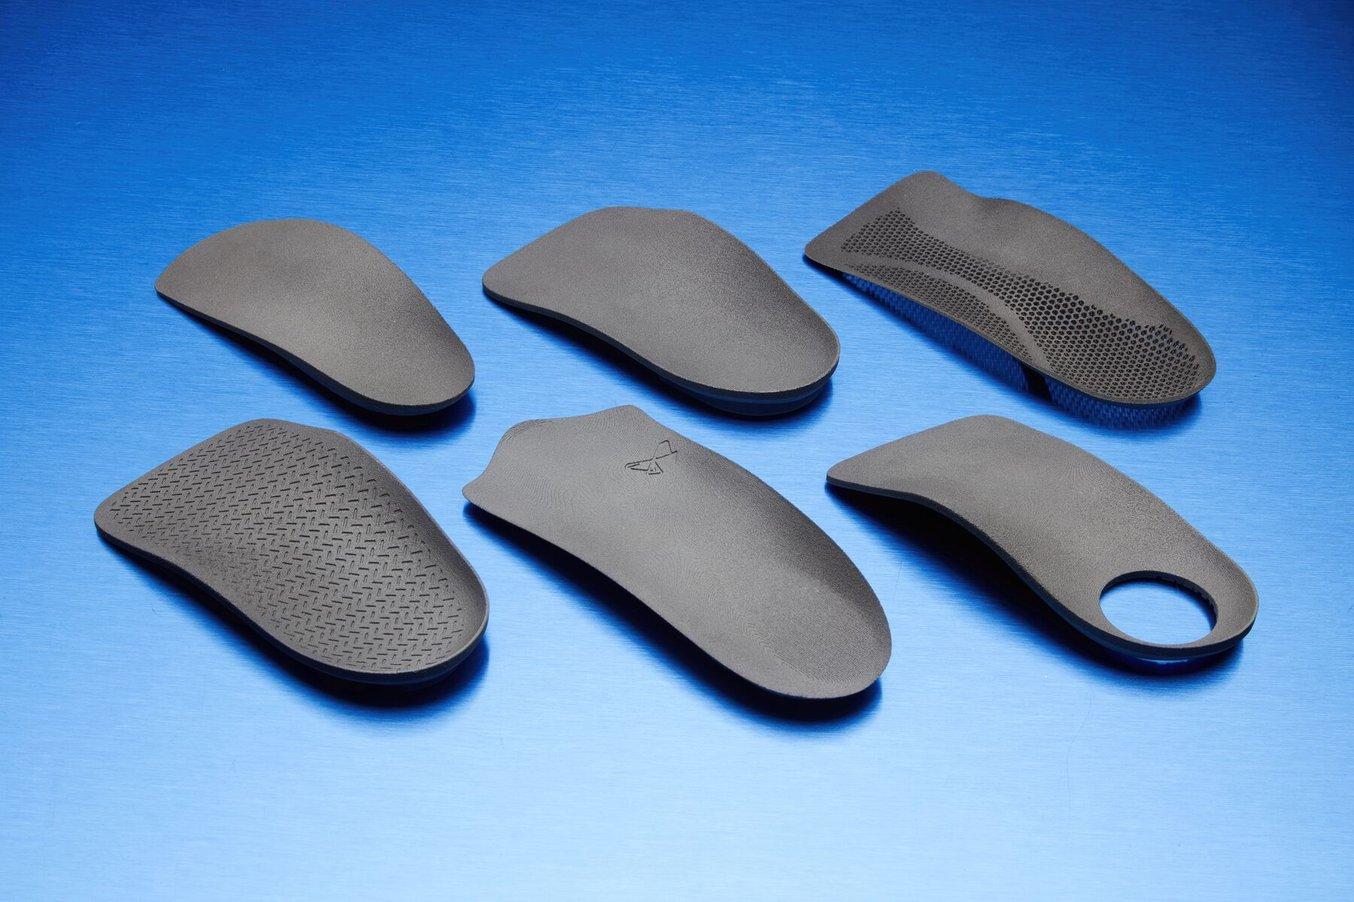 Six 3D printed insoles on a blue background